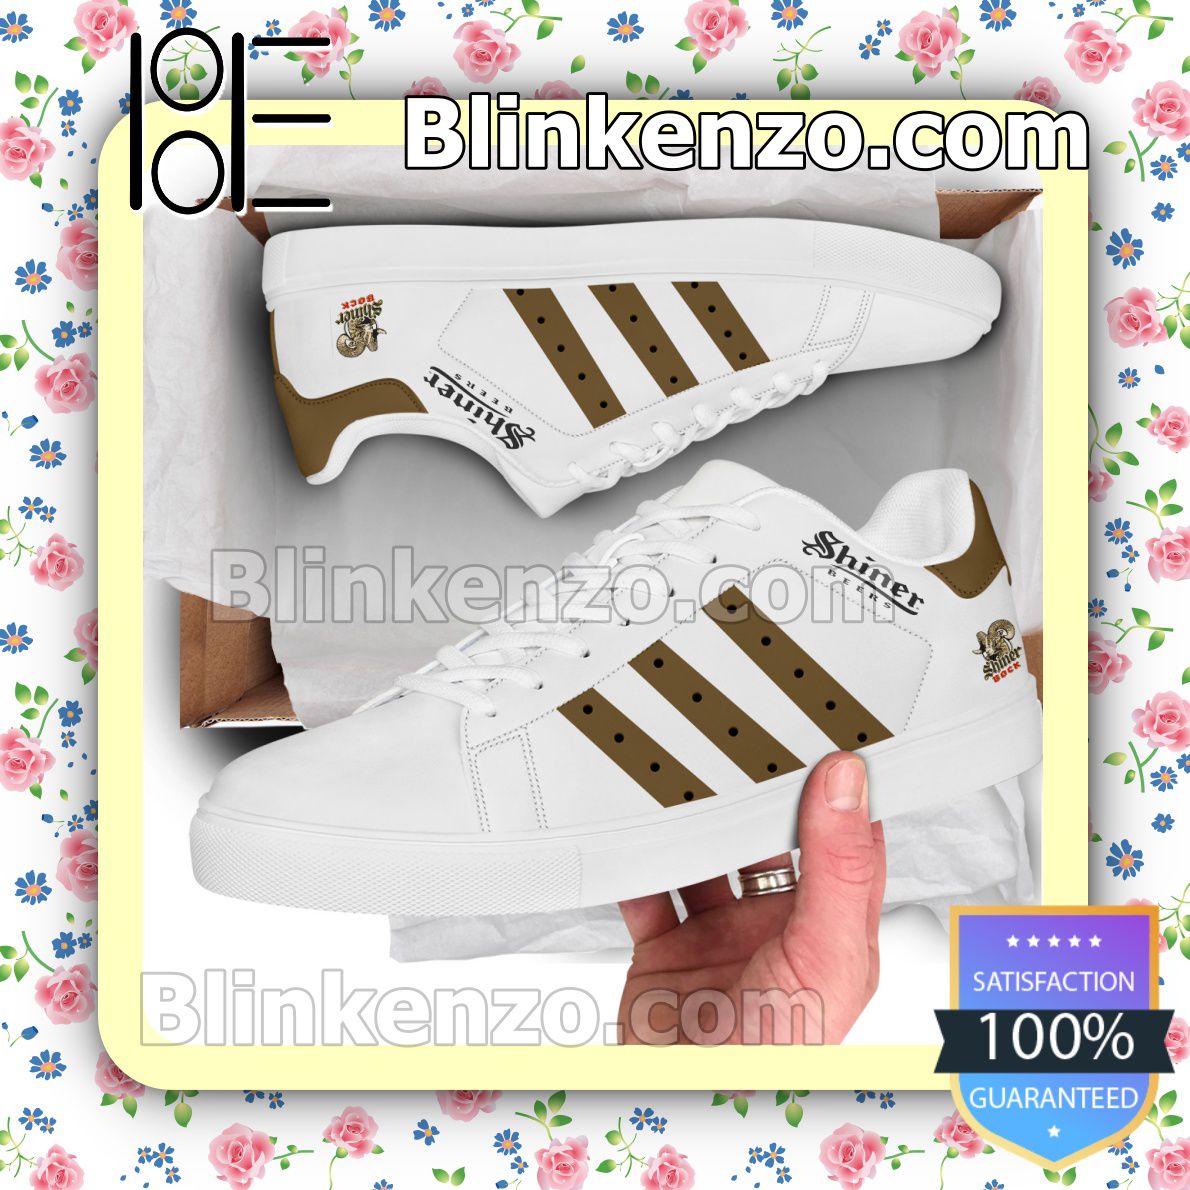 Shiner Beers Logo Brand Adidas Low Top Shoes